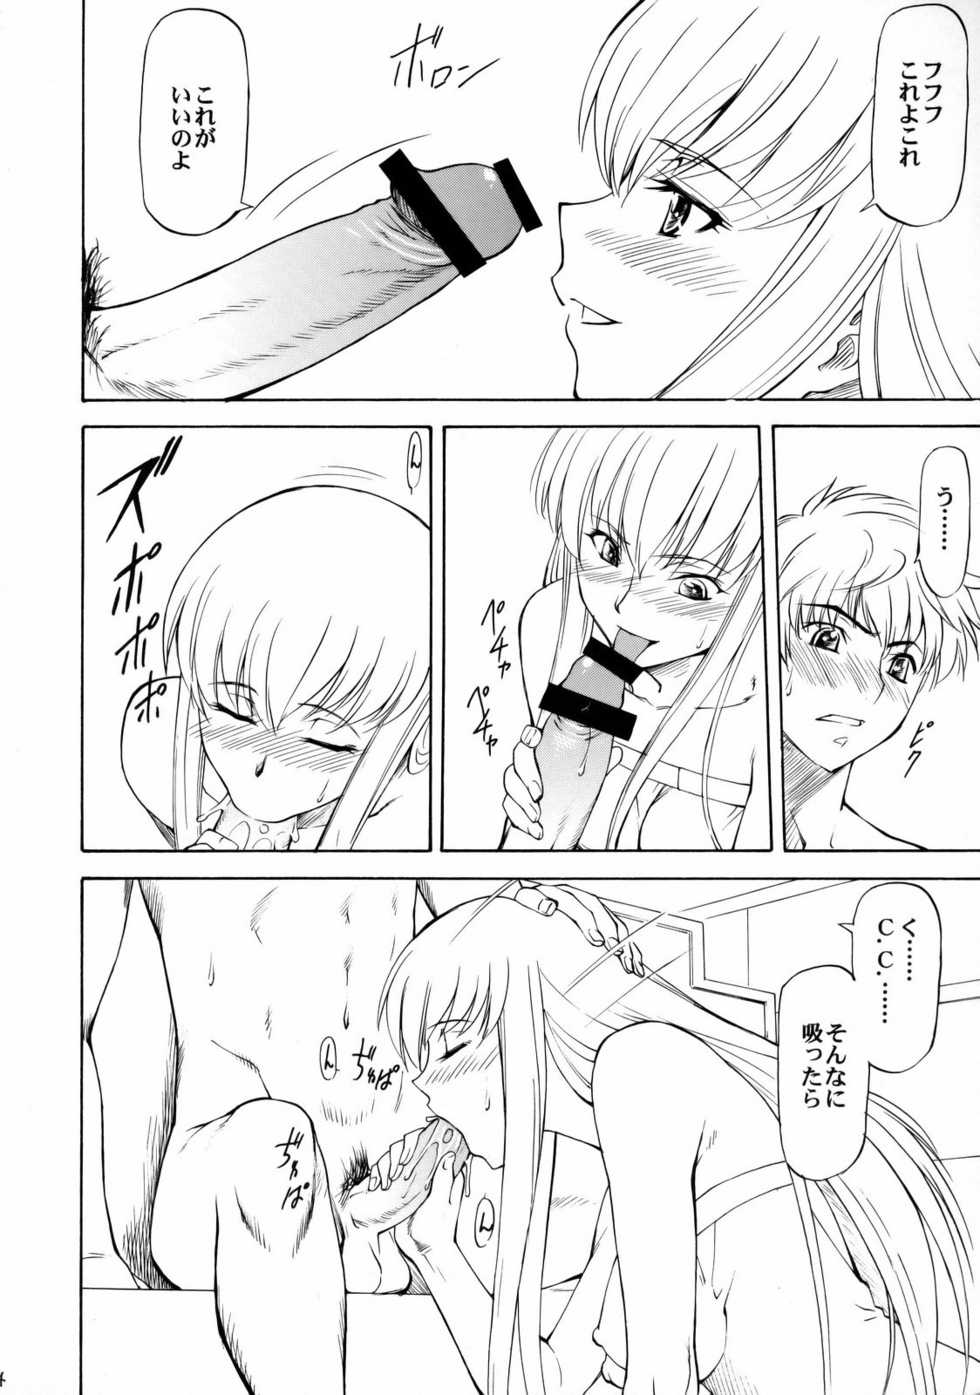 (C75) [Leaf Party (Nagare Ippon)] LeLe Pappa Vol. 14 Megumilk (Code Geass: Lelouch of the Rebellion) - Page 5